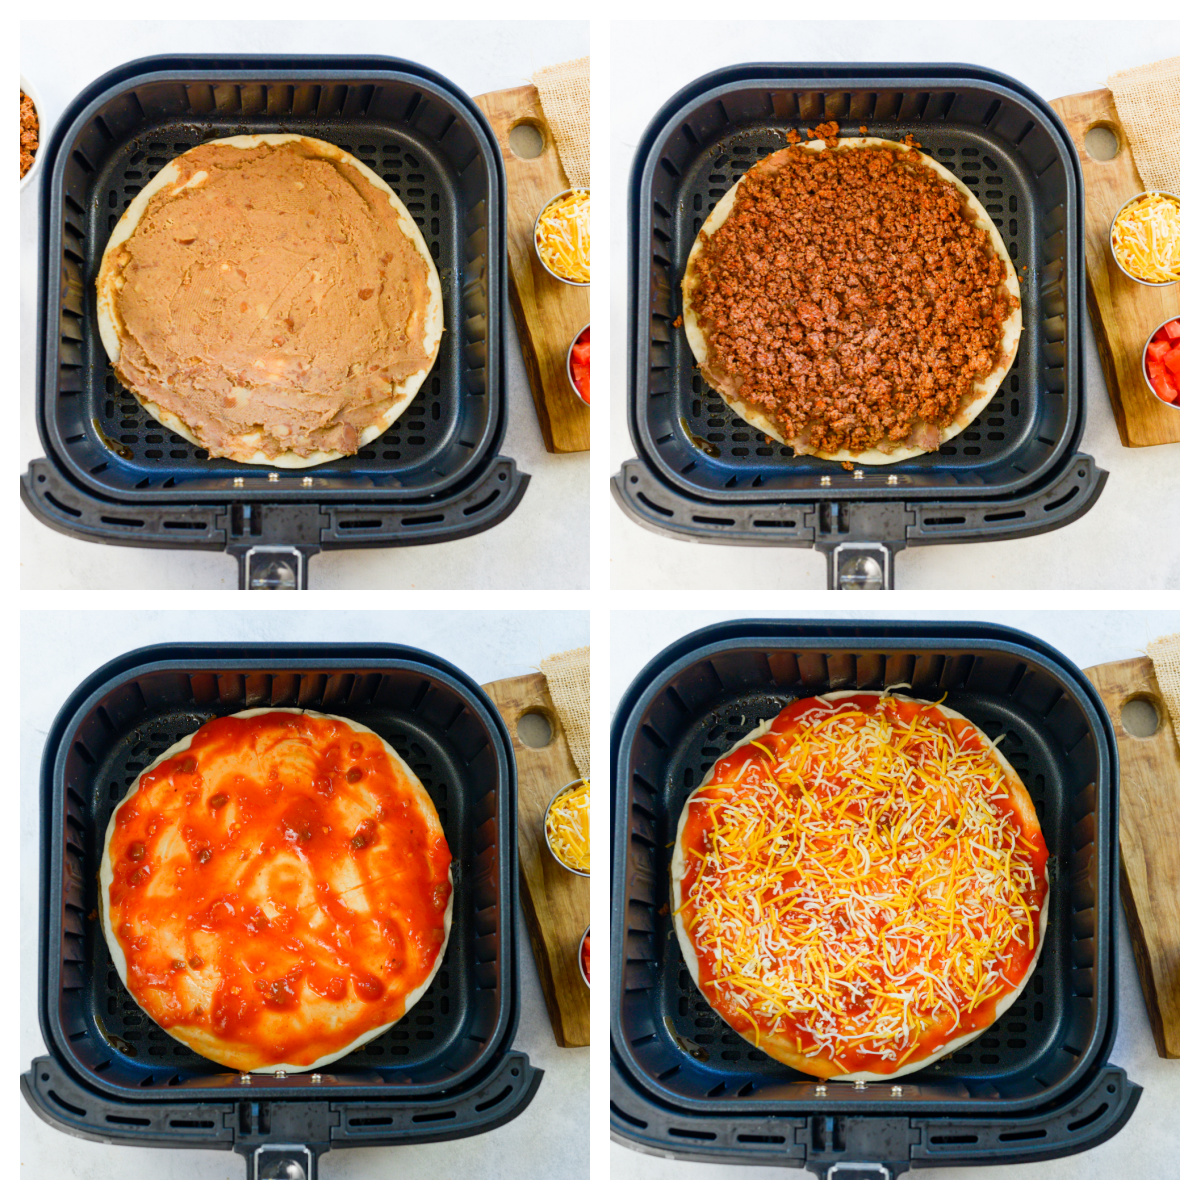 Collage of the steps of adding toppings to Mexican pizza.